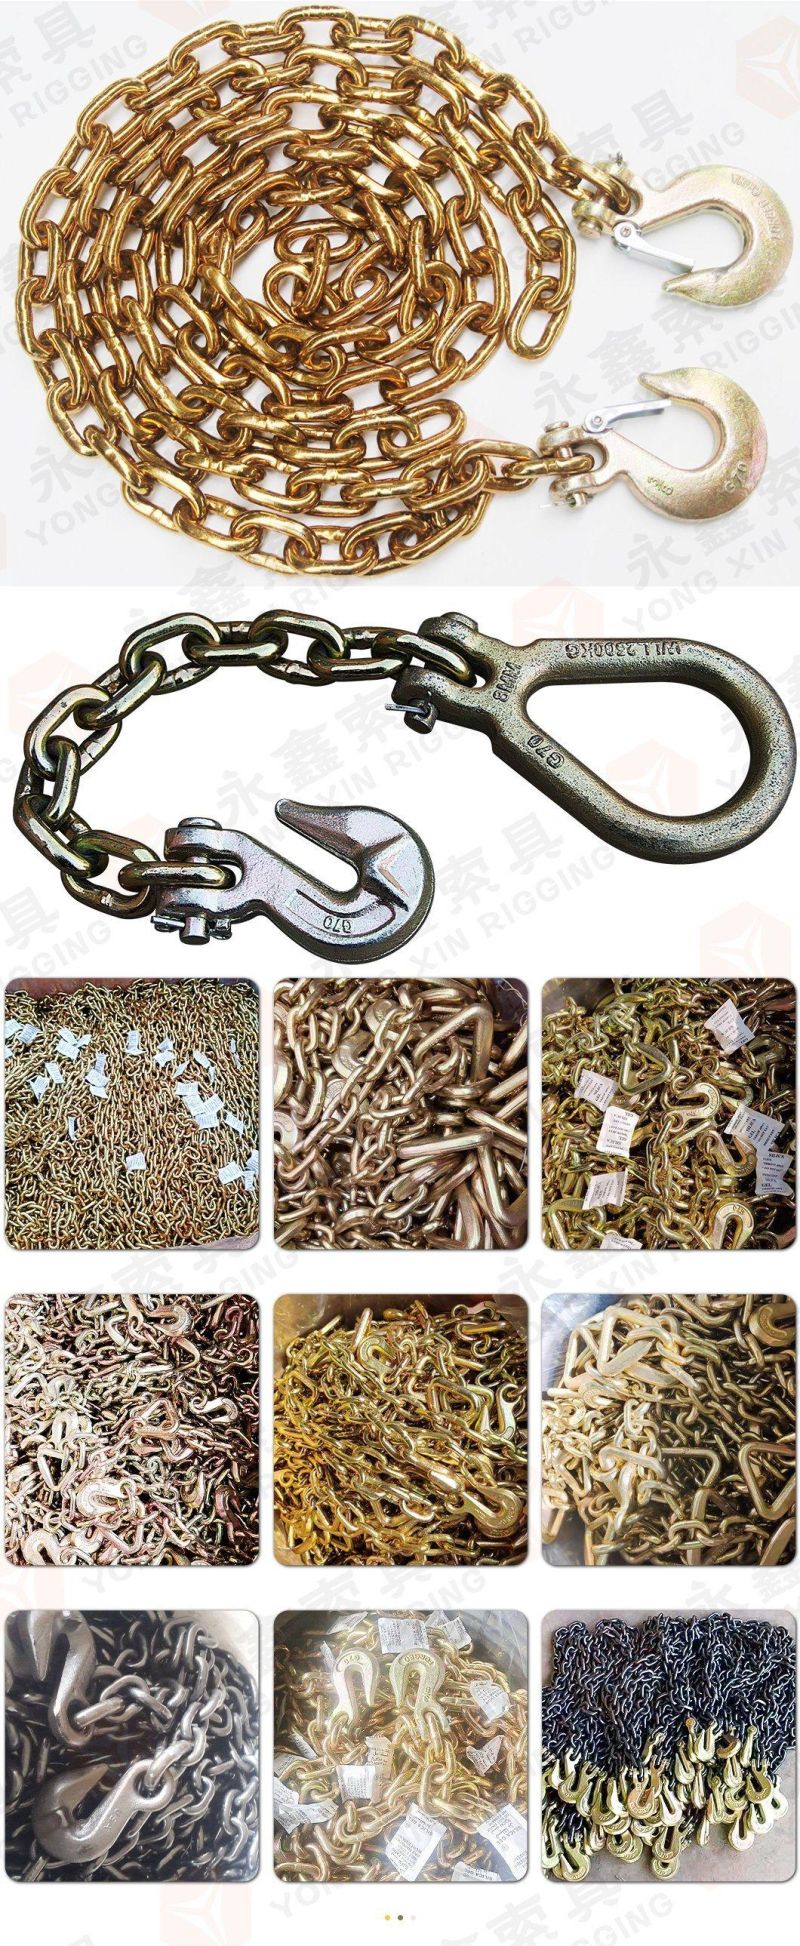 G70 5/16 X 20 Binder Chain with Clevis Grab Hooks